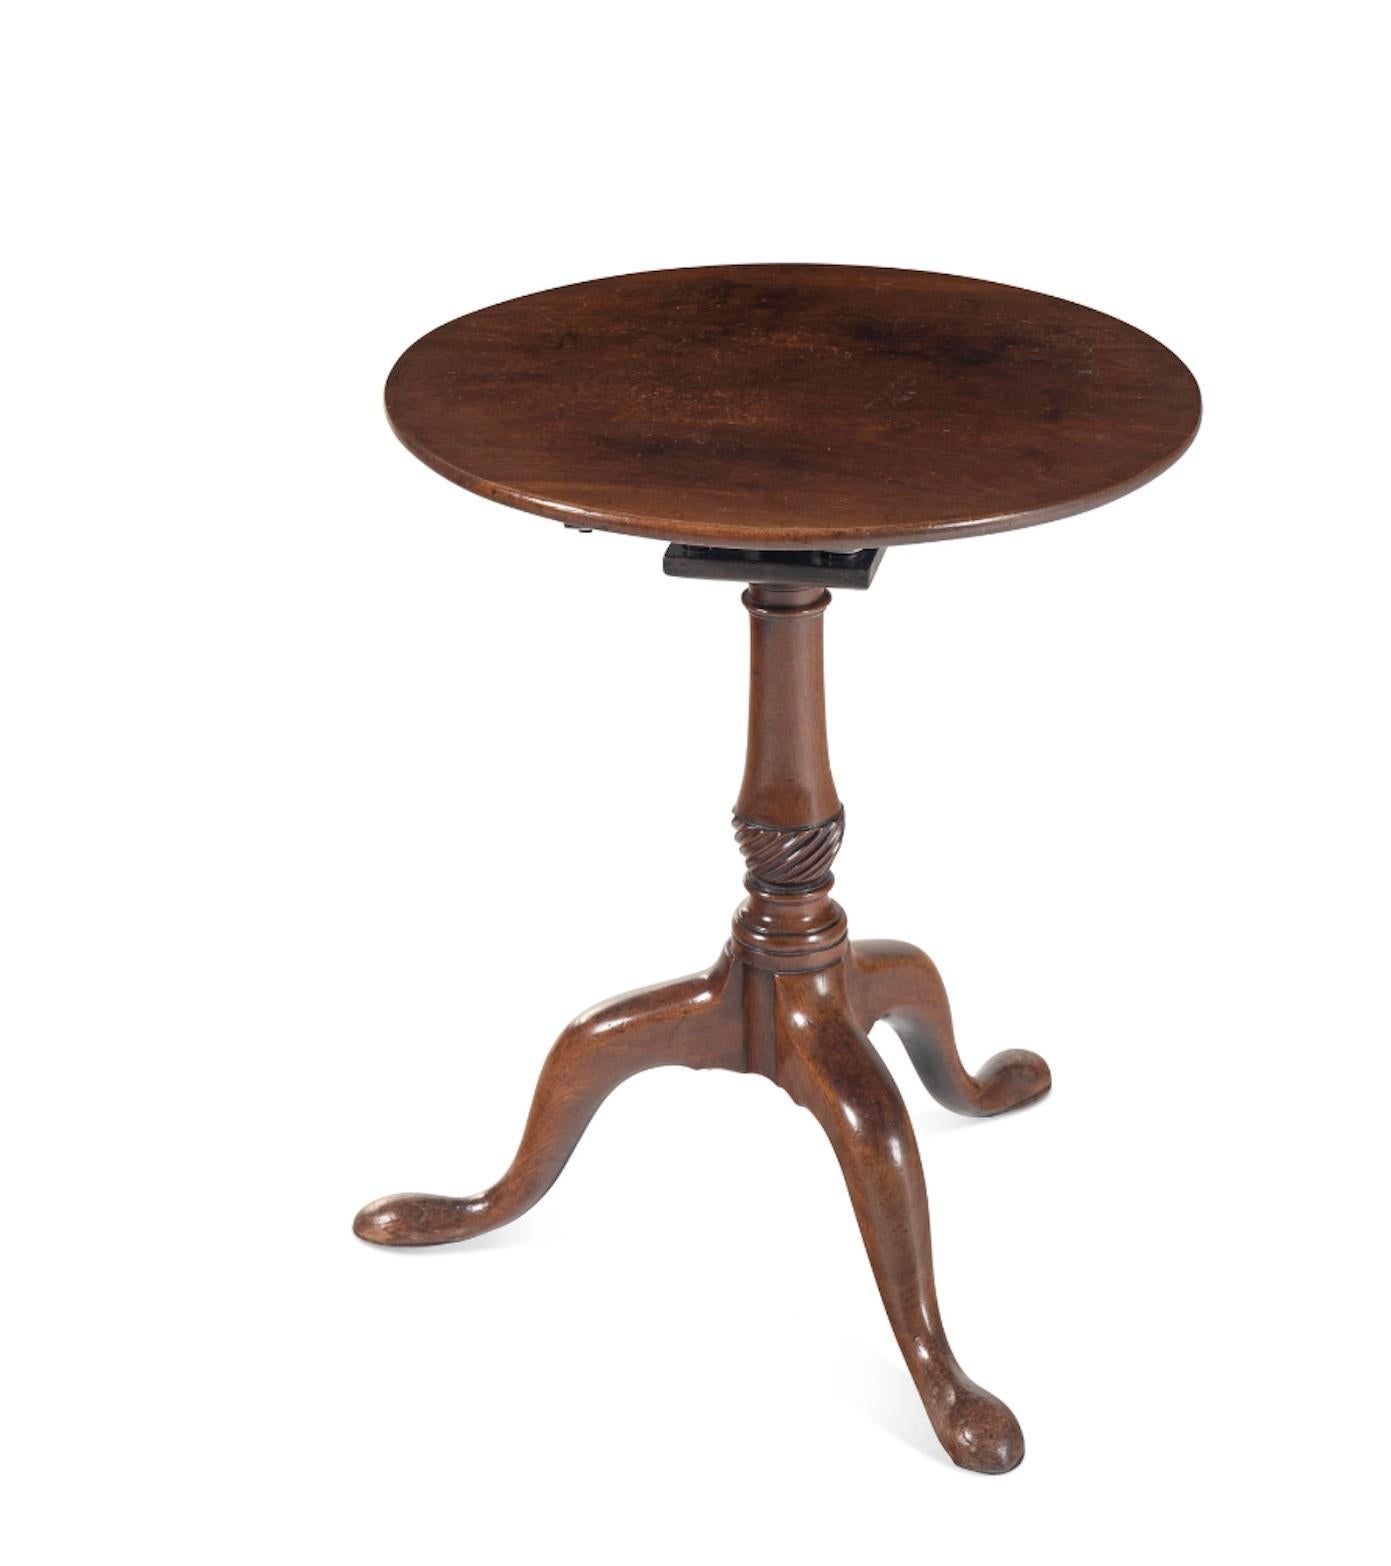 English A George III Mahogany Tilt-Top Table 18th Century.  Great color and patination. For Sale